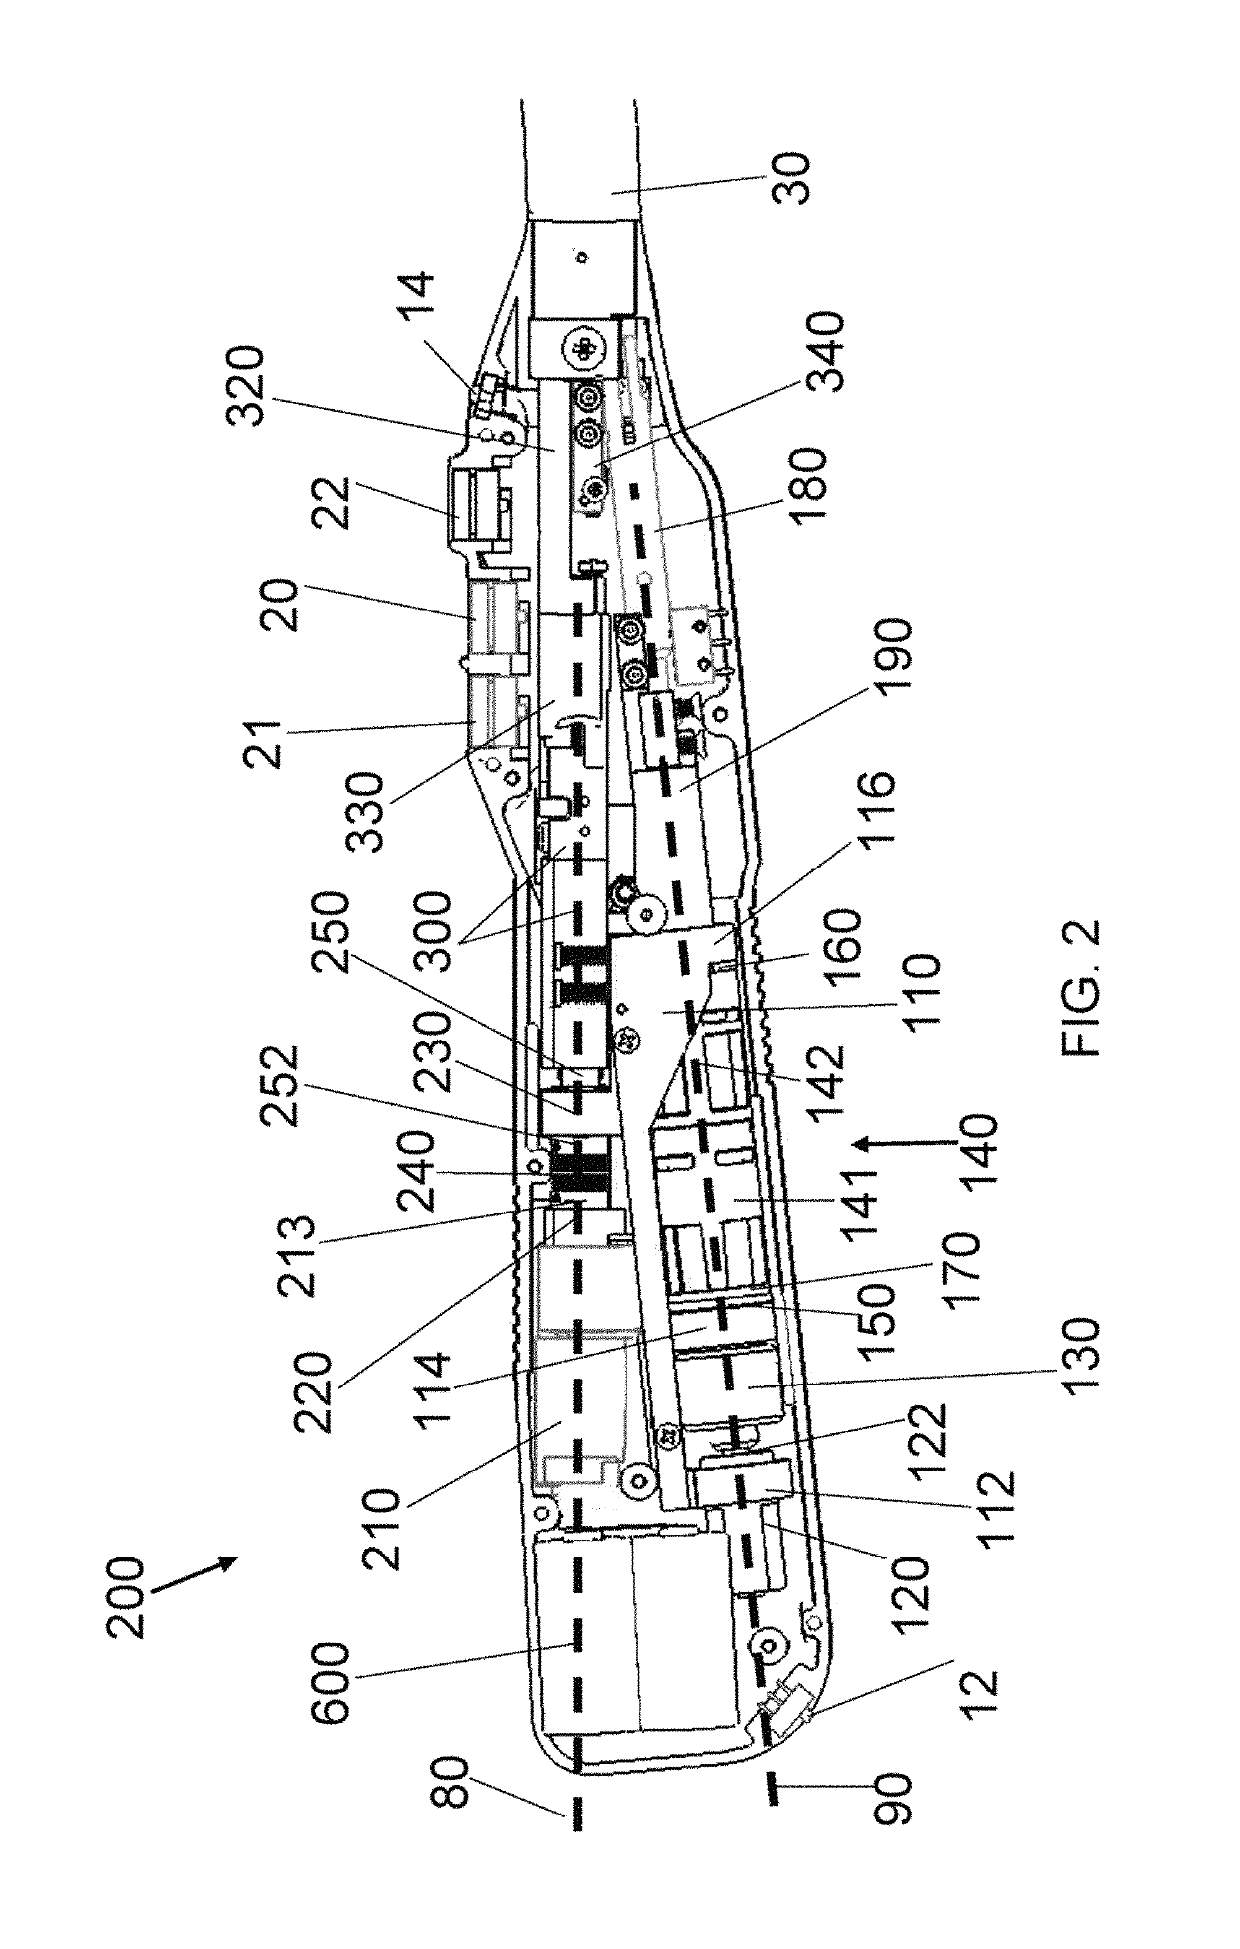 Electrically self-powered surgical instrument with manual release